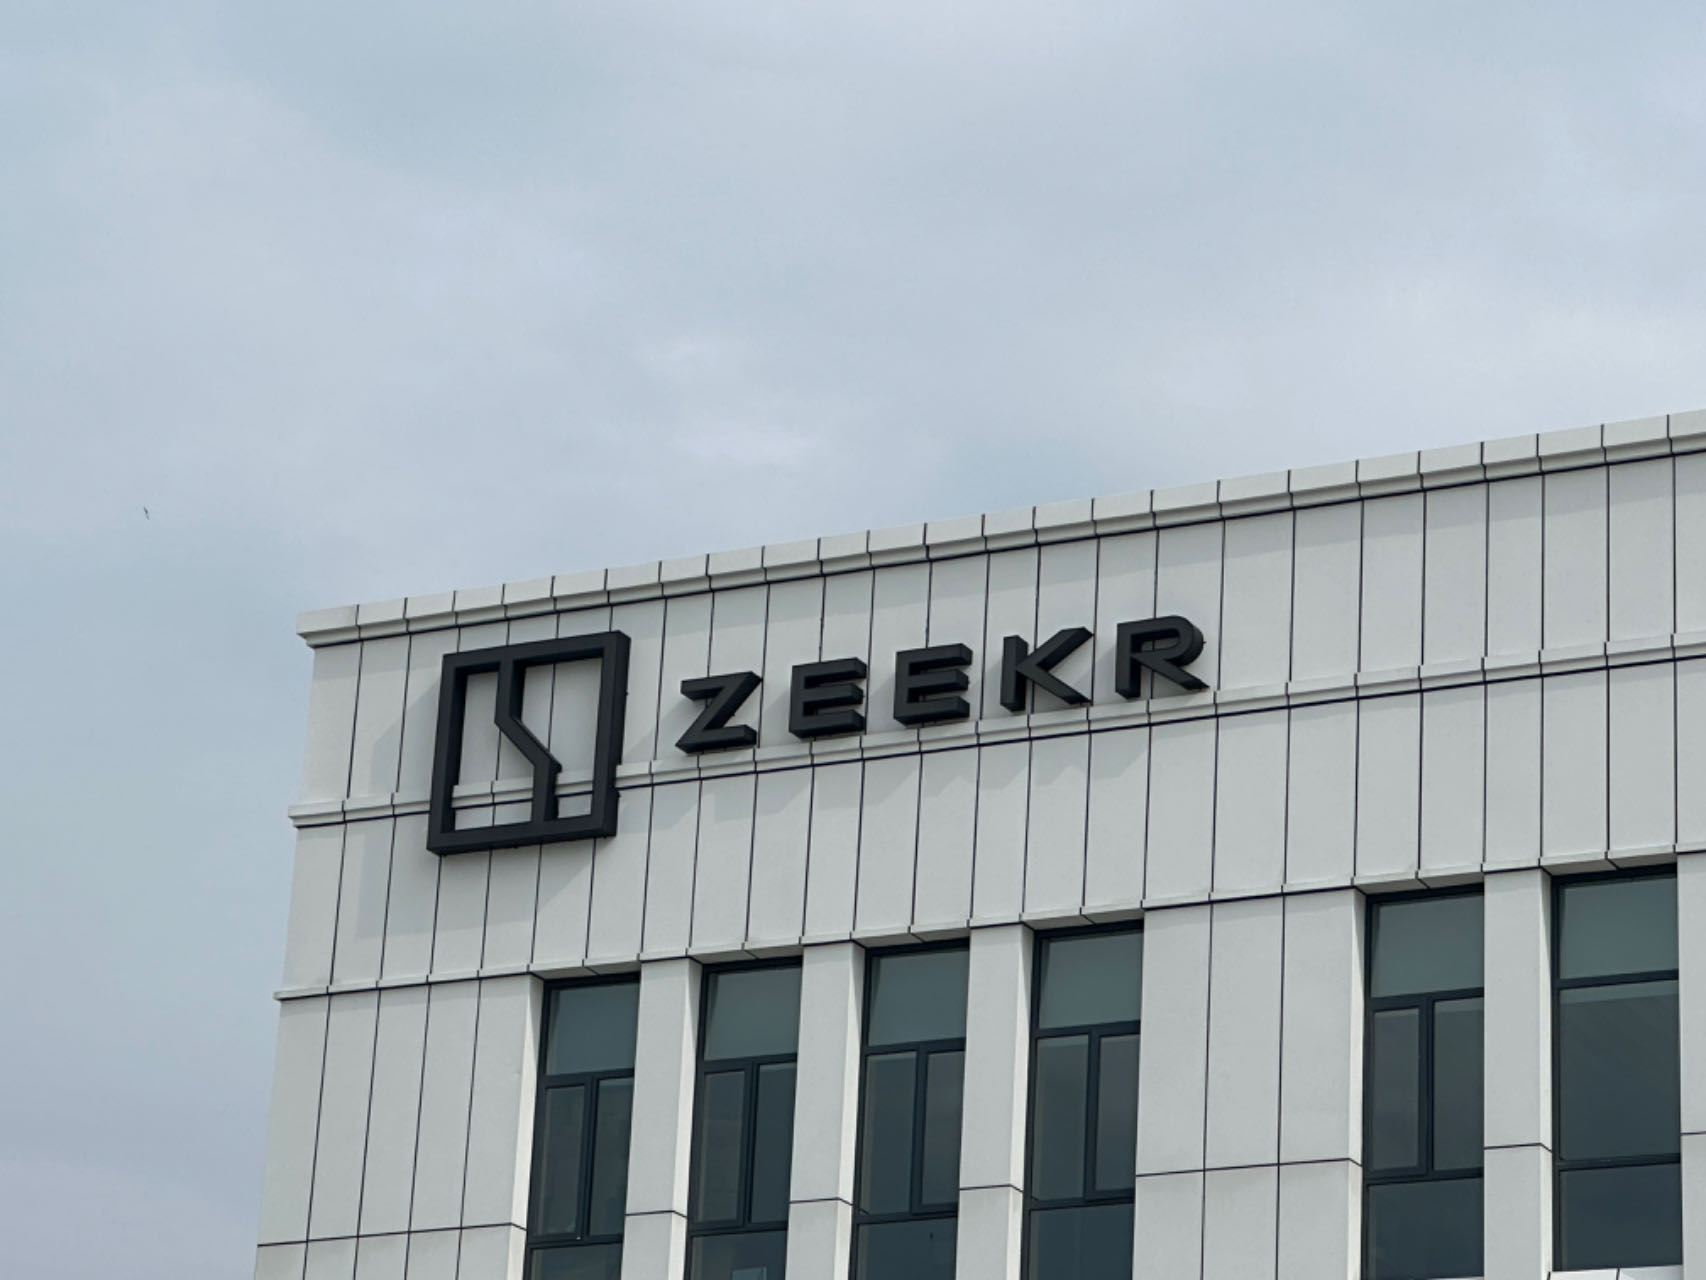 ZEEKR's Commitment to Safety in the Growing Era of EVs